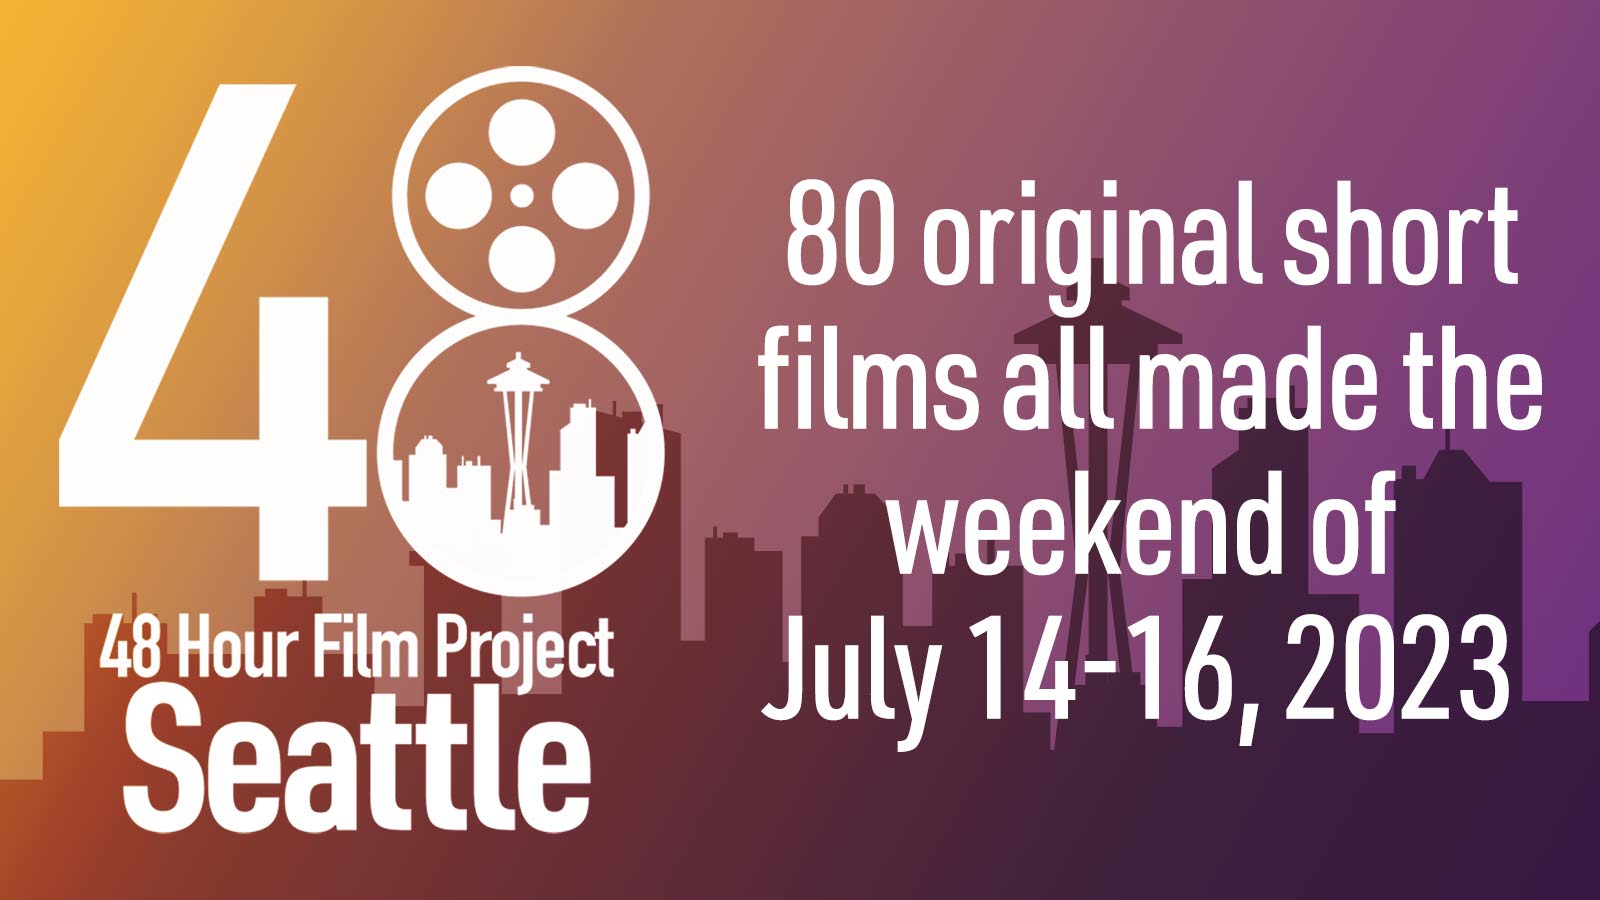 48 Hour Film Project Seattle, Showing 80 original short films made in 48 hours from July 14-16